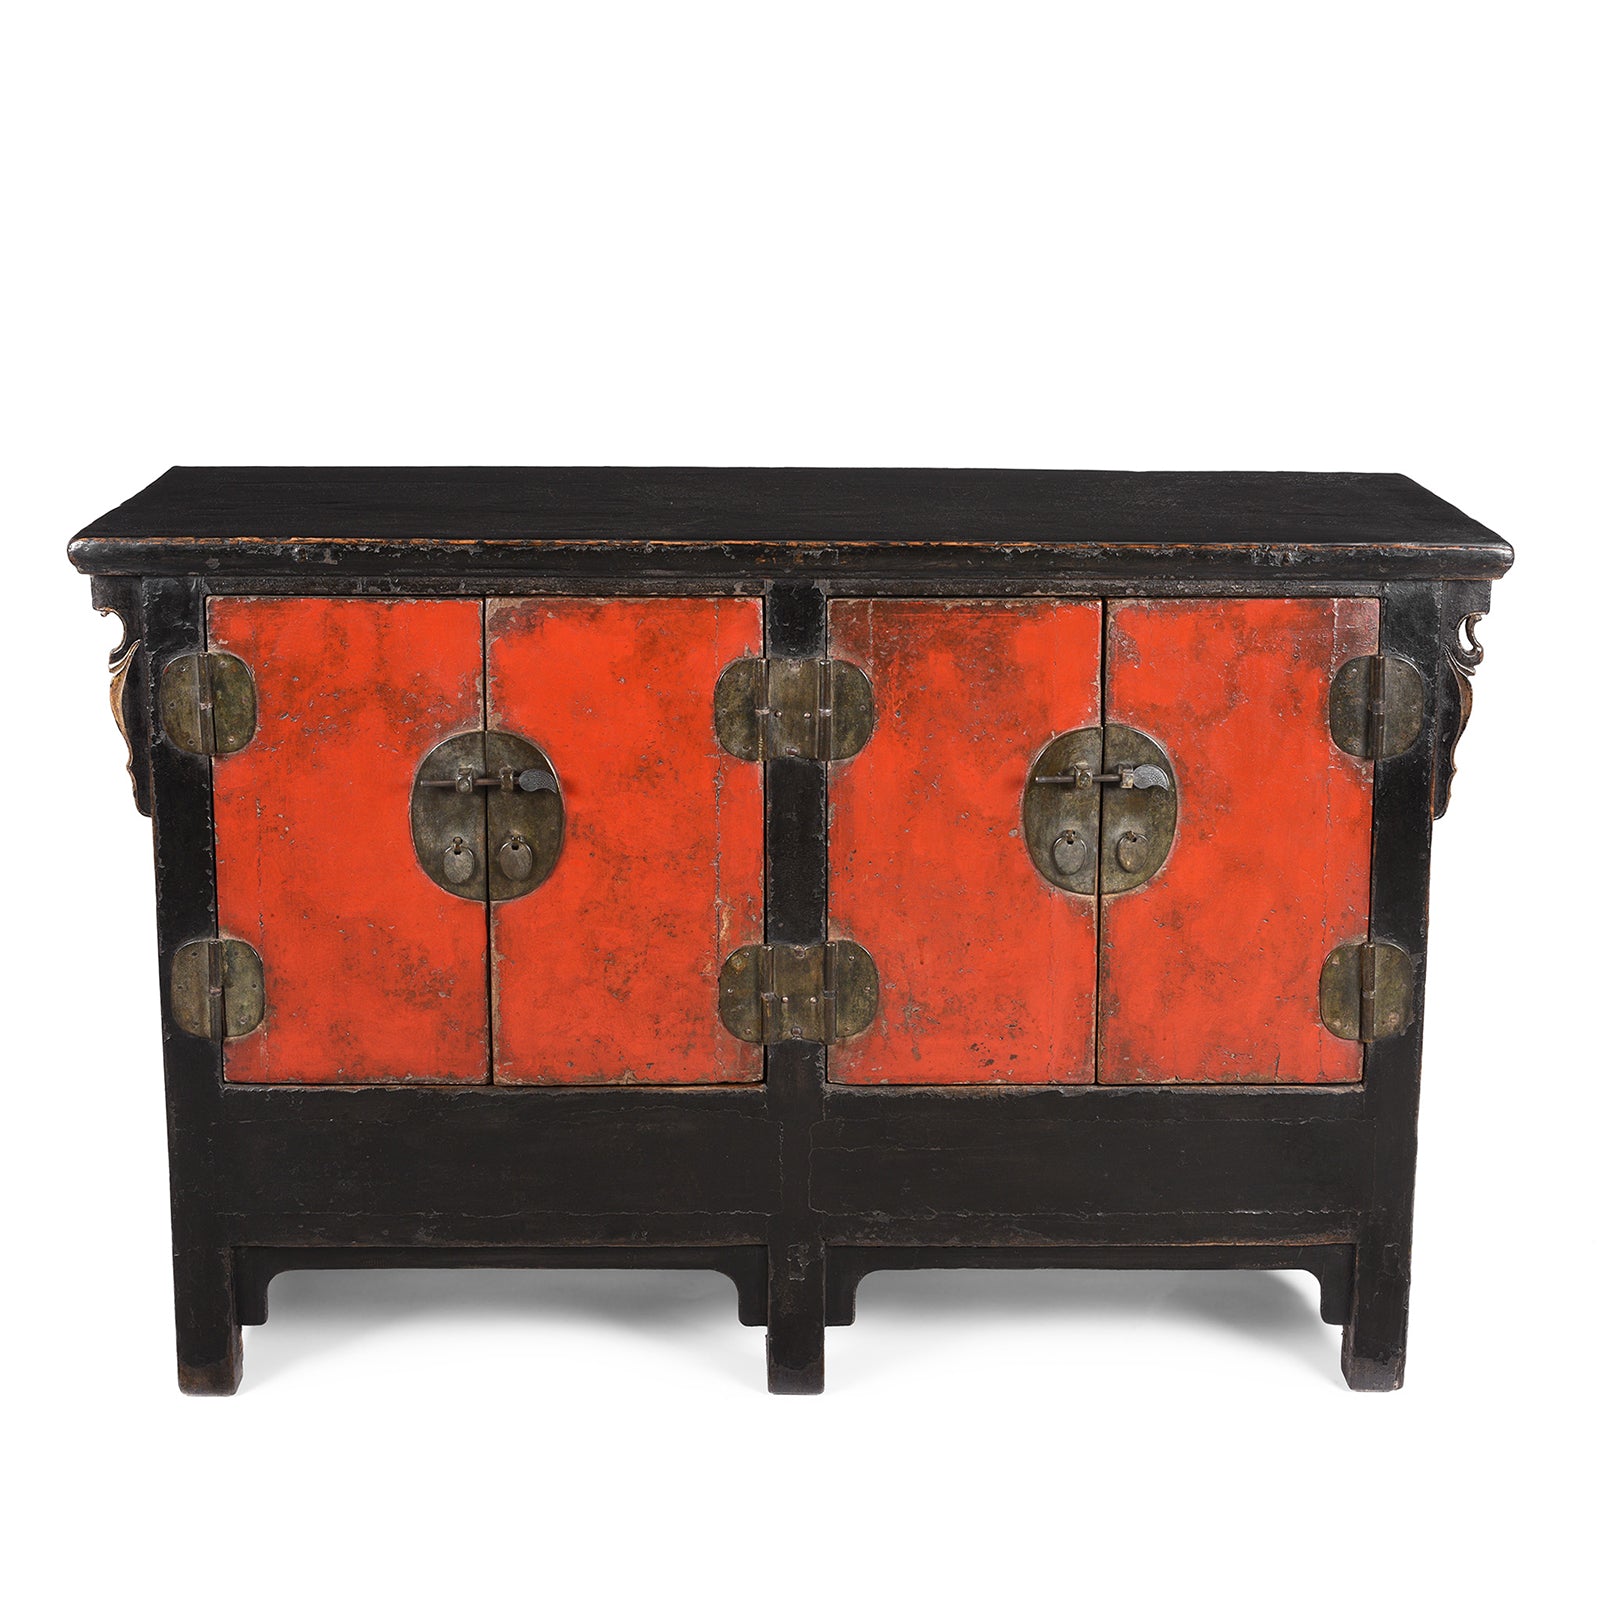 Red & Black Lacquer Sideboard From Shanxi - 18thC | Indigo Antiques